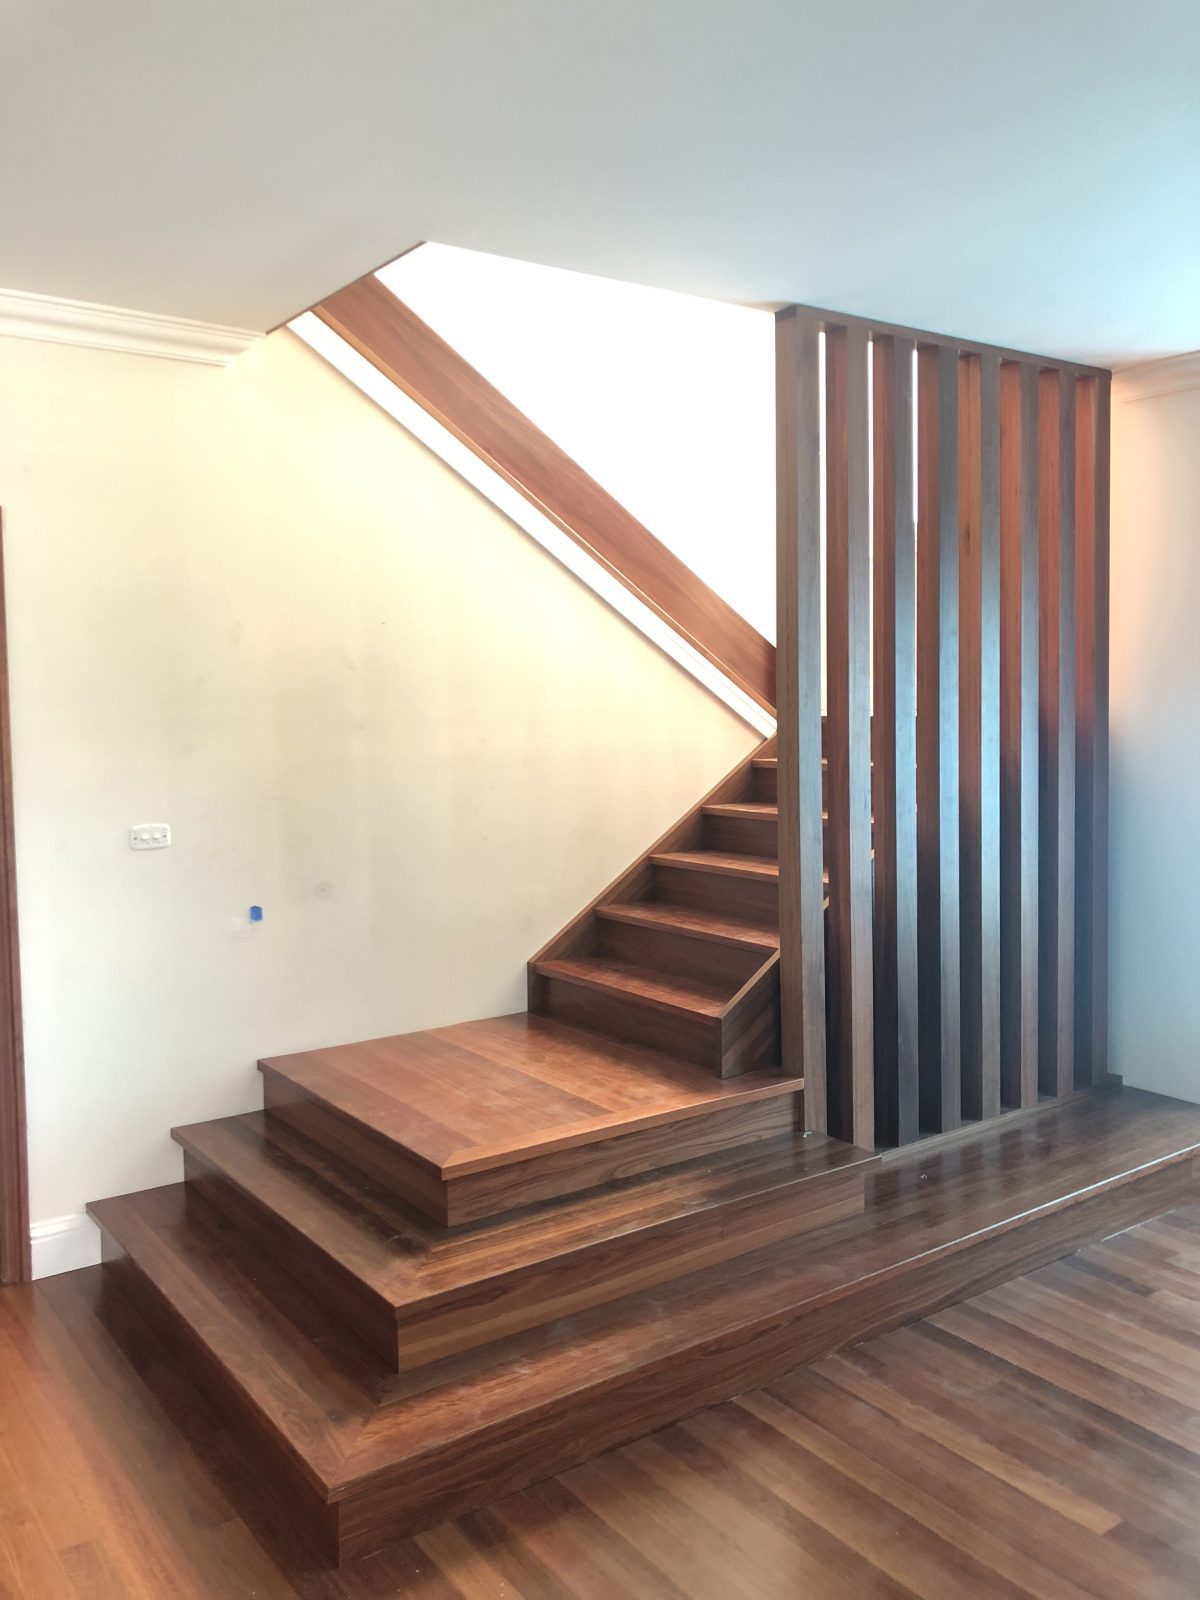 Unique design options through consultation with our Clients can provide some interesting staircase options to choose from by Timber Floors Pty Ltd